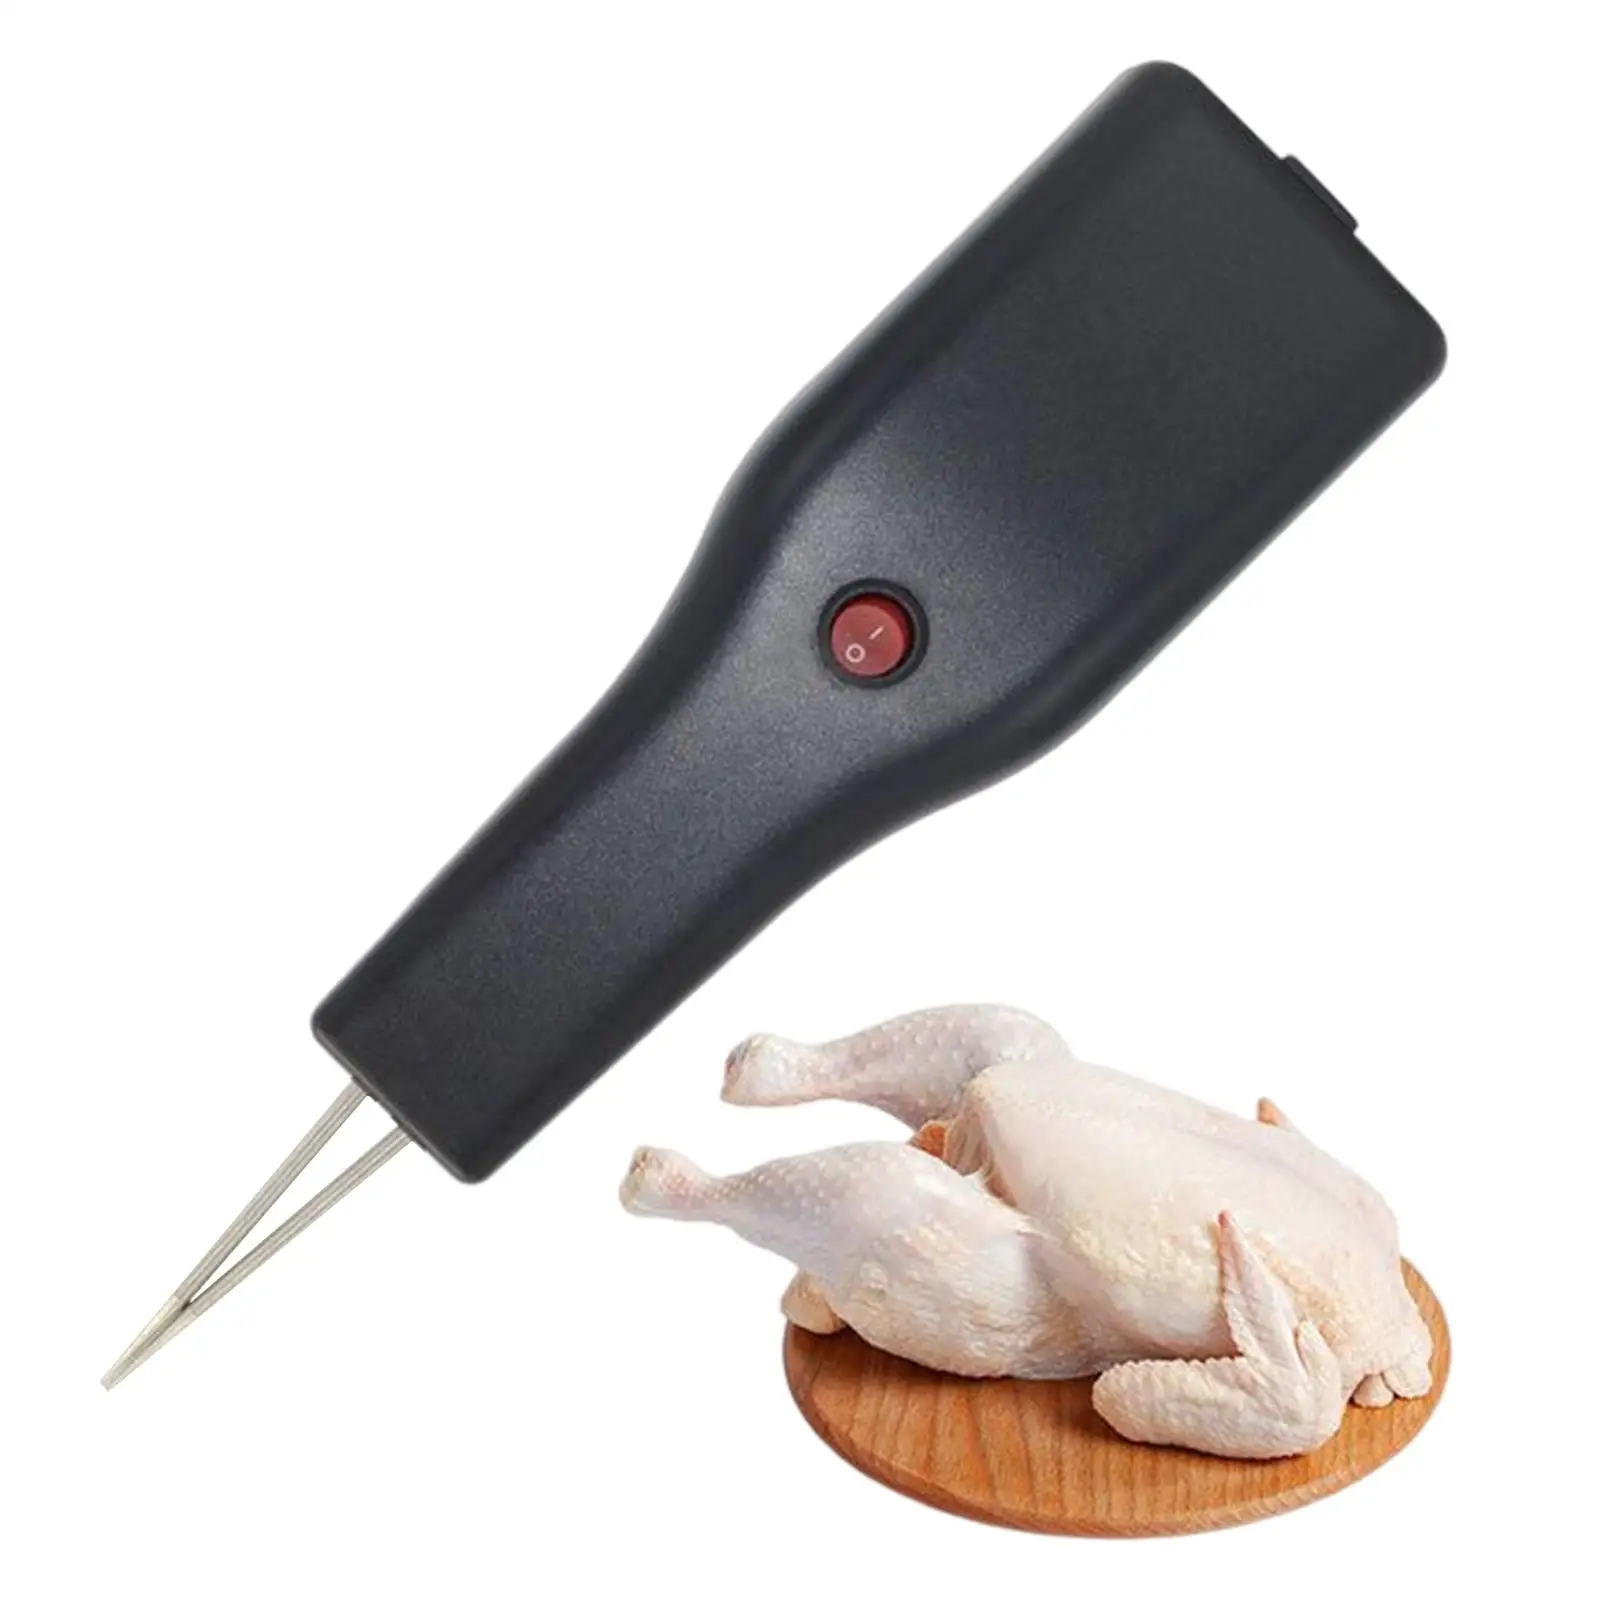 Handheld Electric Poultry Plucker Hair Remover Tool Plug and Play for Home Camping US Plug